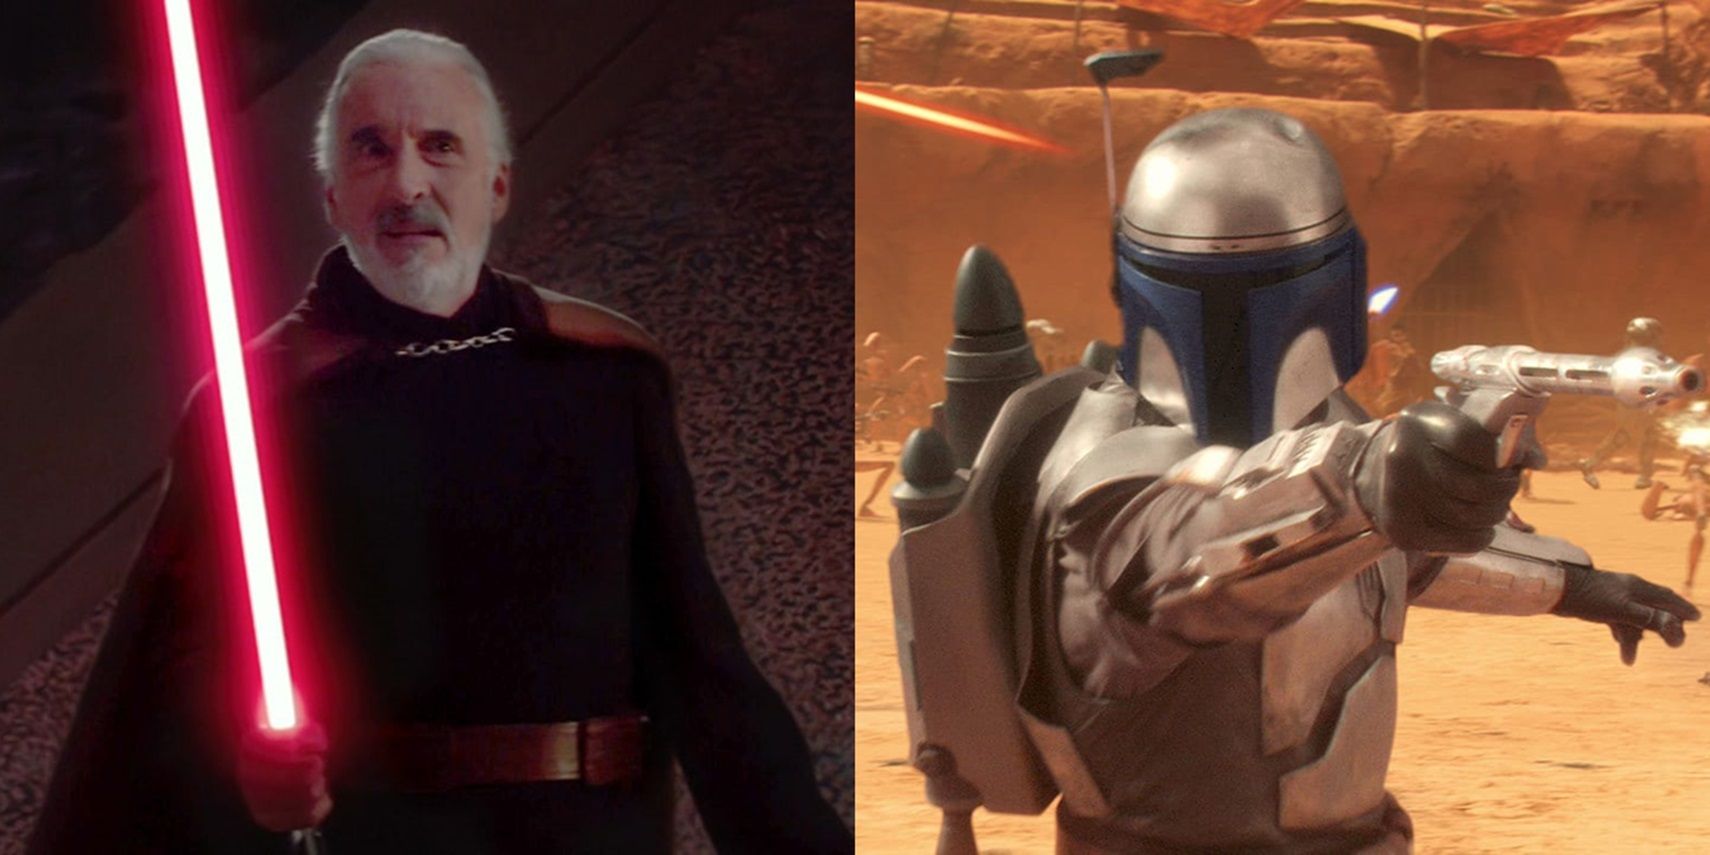 Split image of Count Dooku holding his lightsaber and Jango Fett aiming his blaster in Attack of the Clones